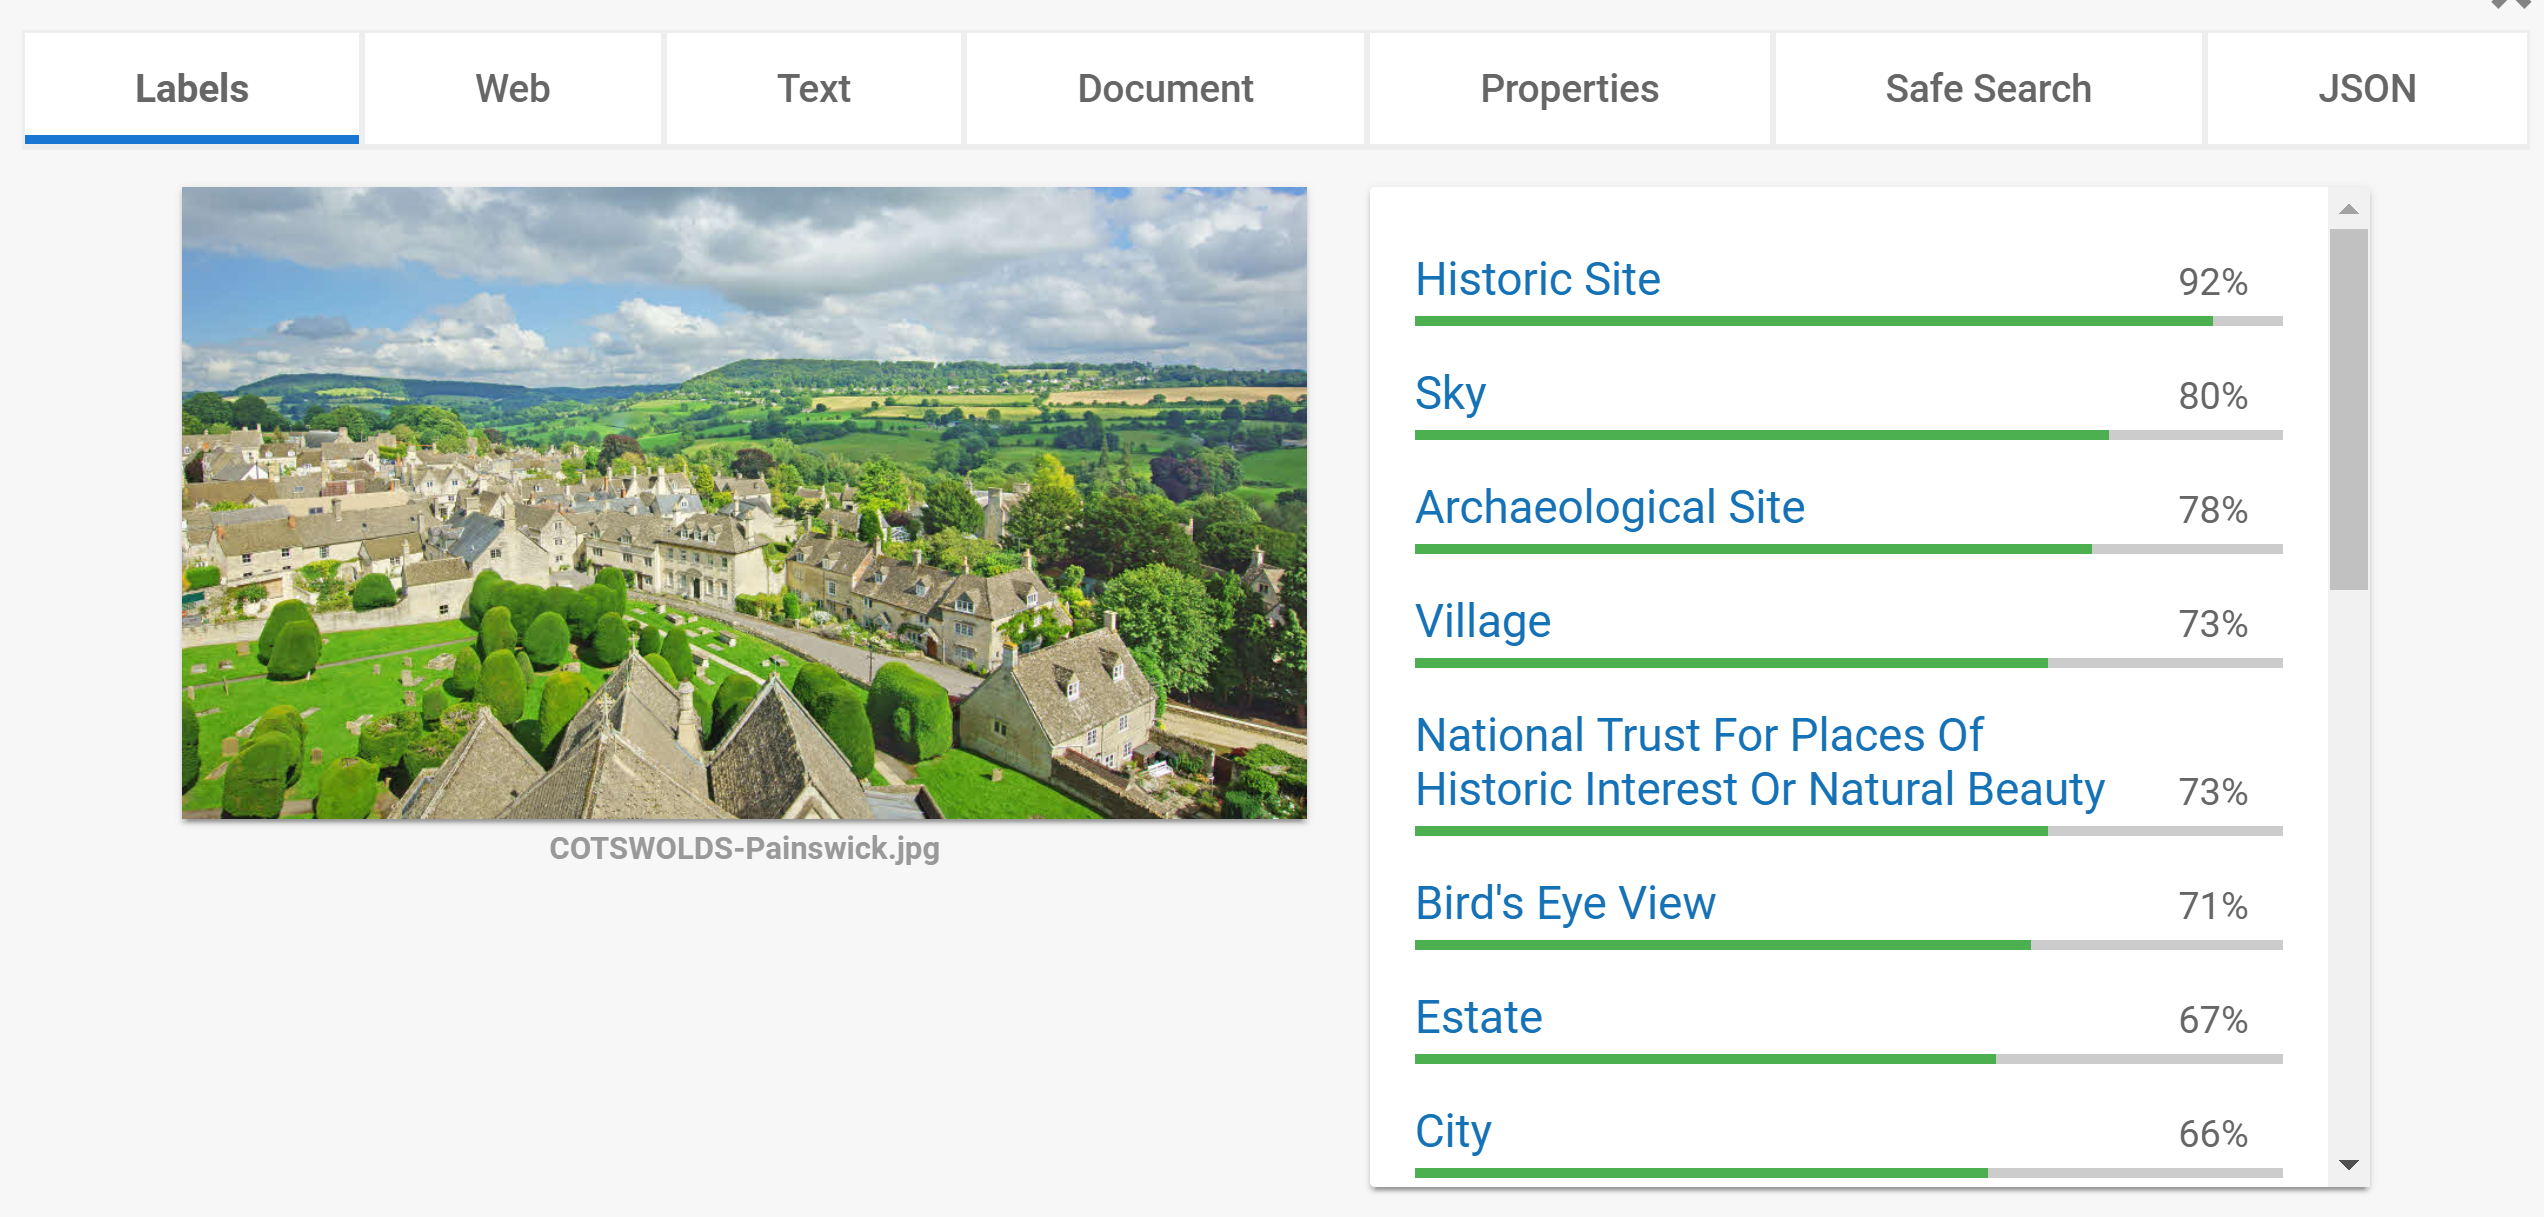 'Google Vision on the Cotswolds'